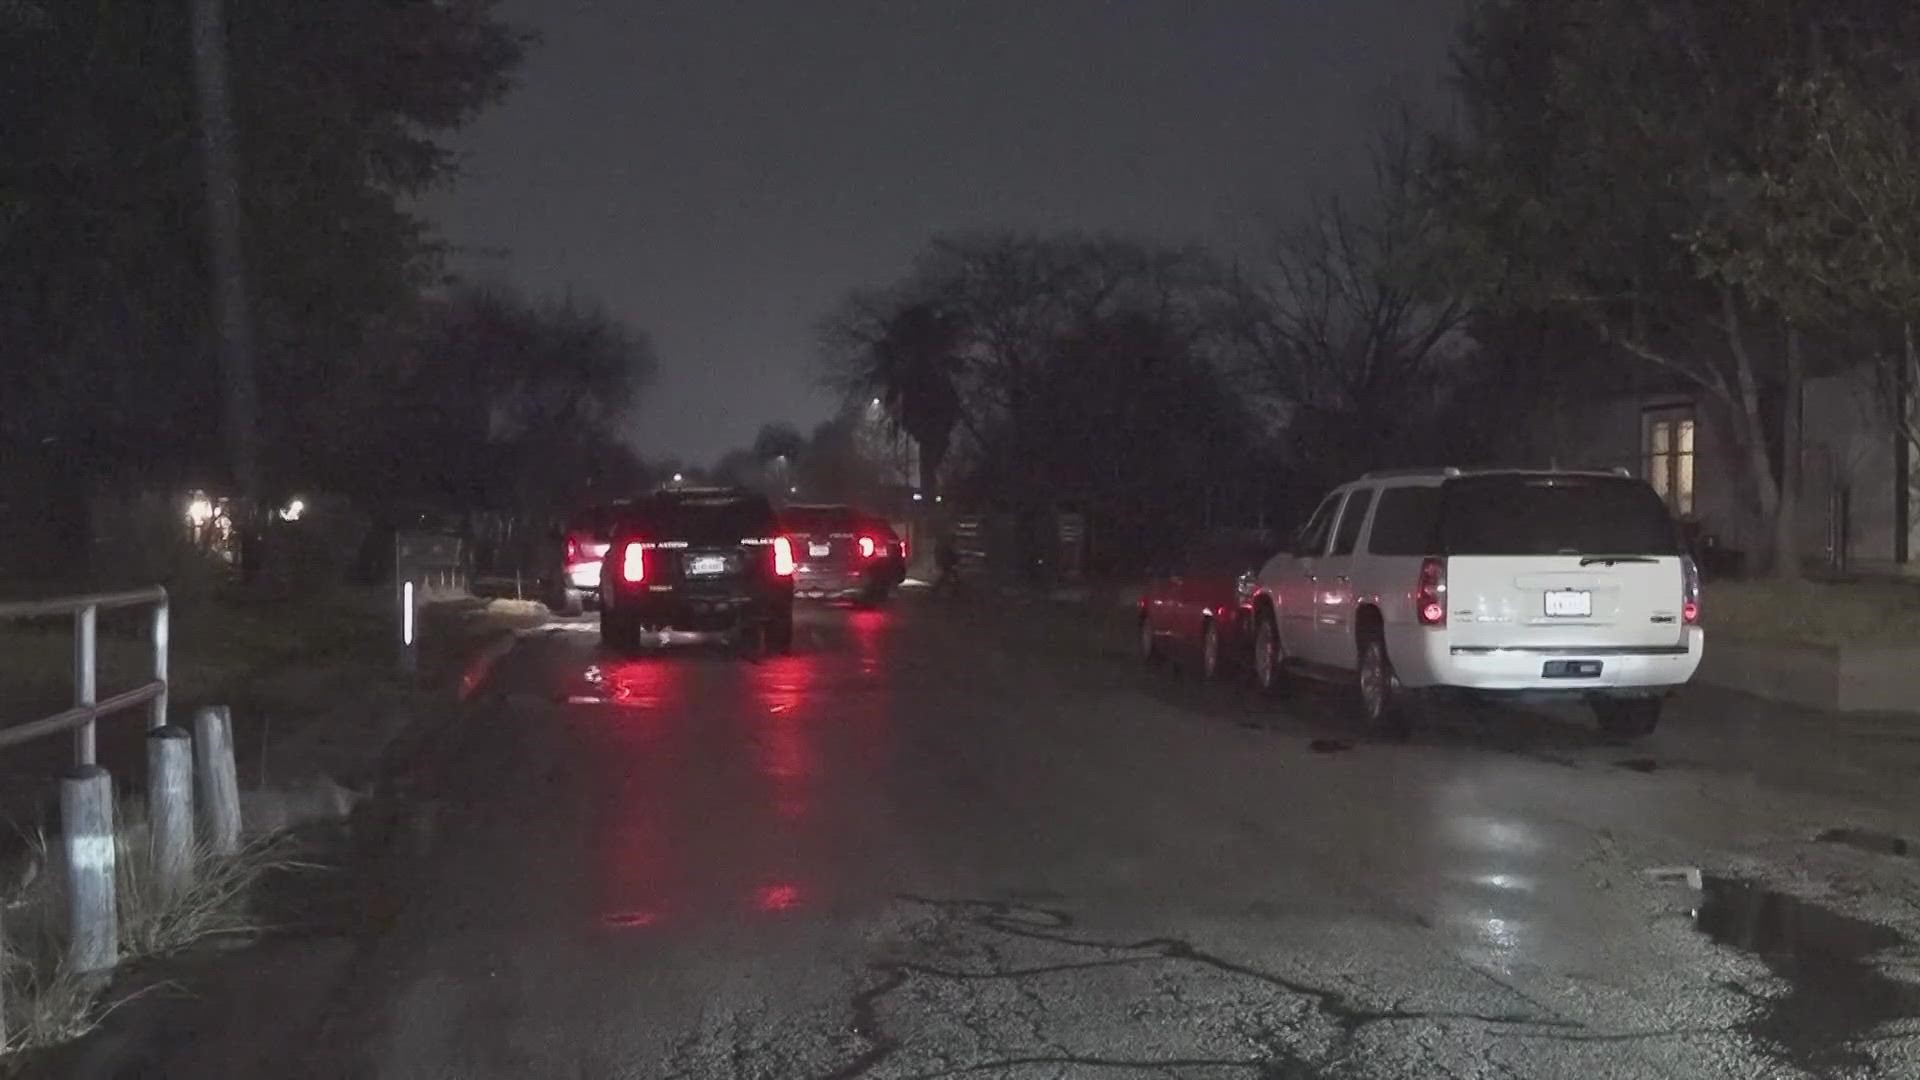 A grandmother sprang into action after finding out her grandson had been robbed at gunpoint on the city's far southwest side, officials say.